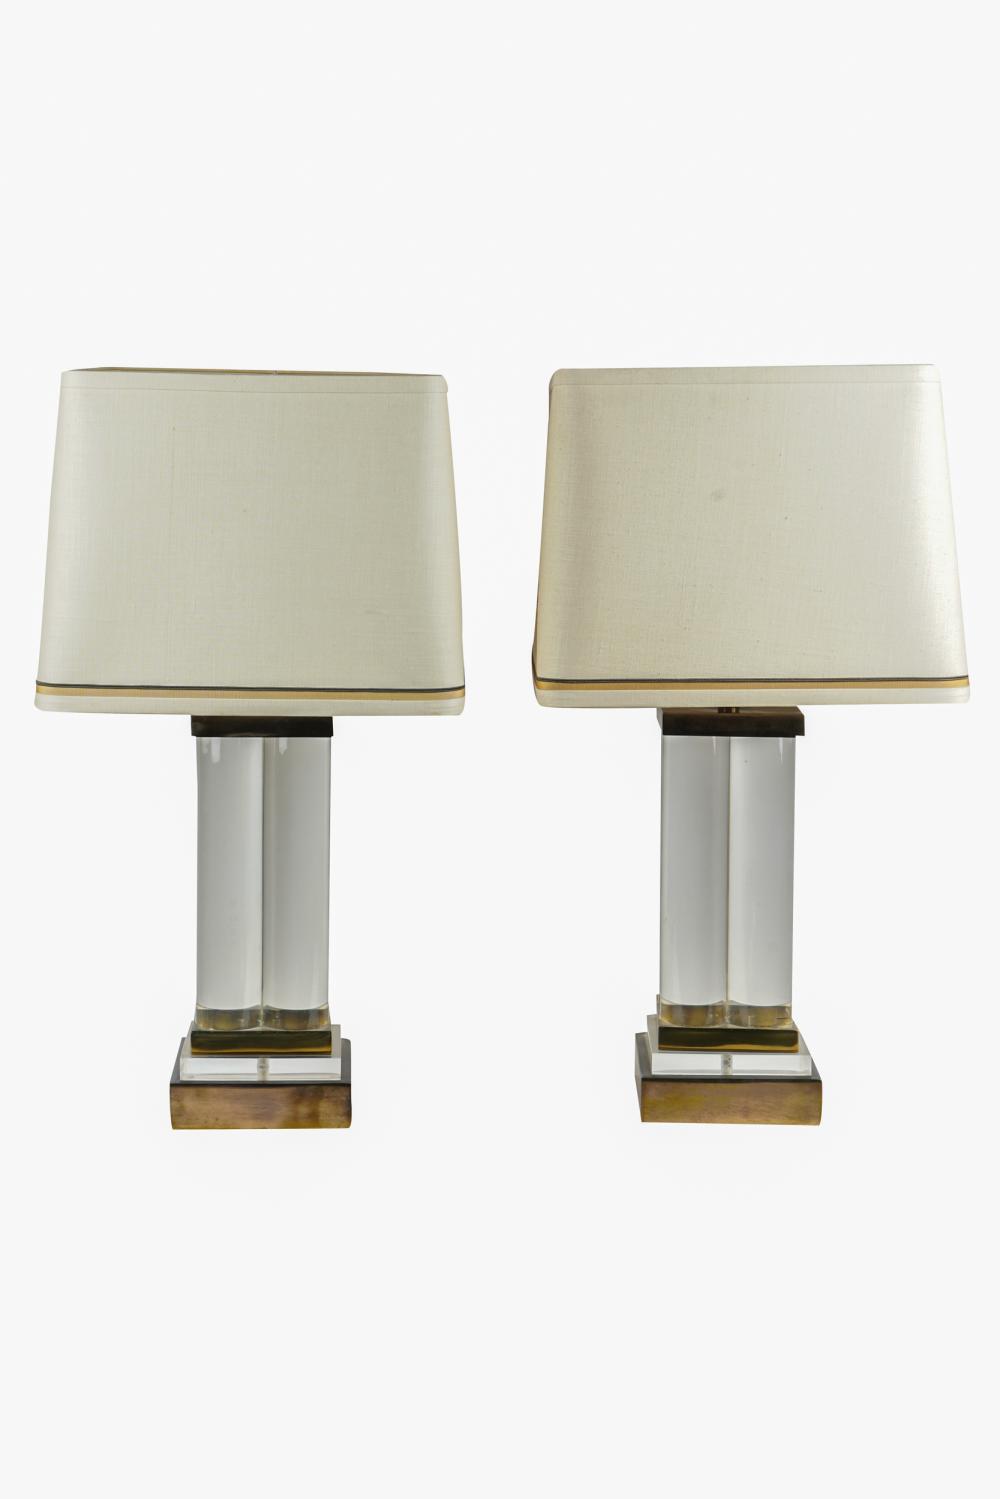 PAIR OF ACRYLIC & METAL TABLE LAMPSwith